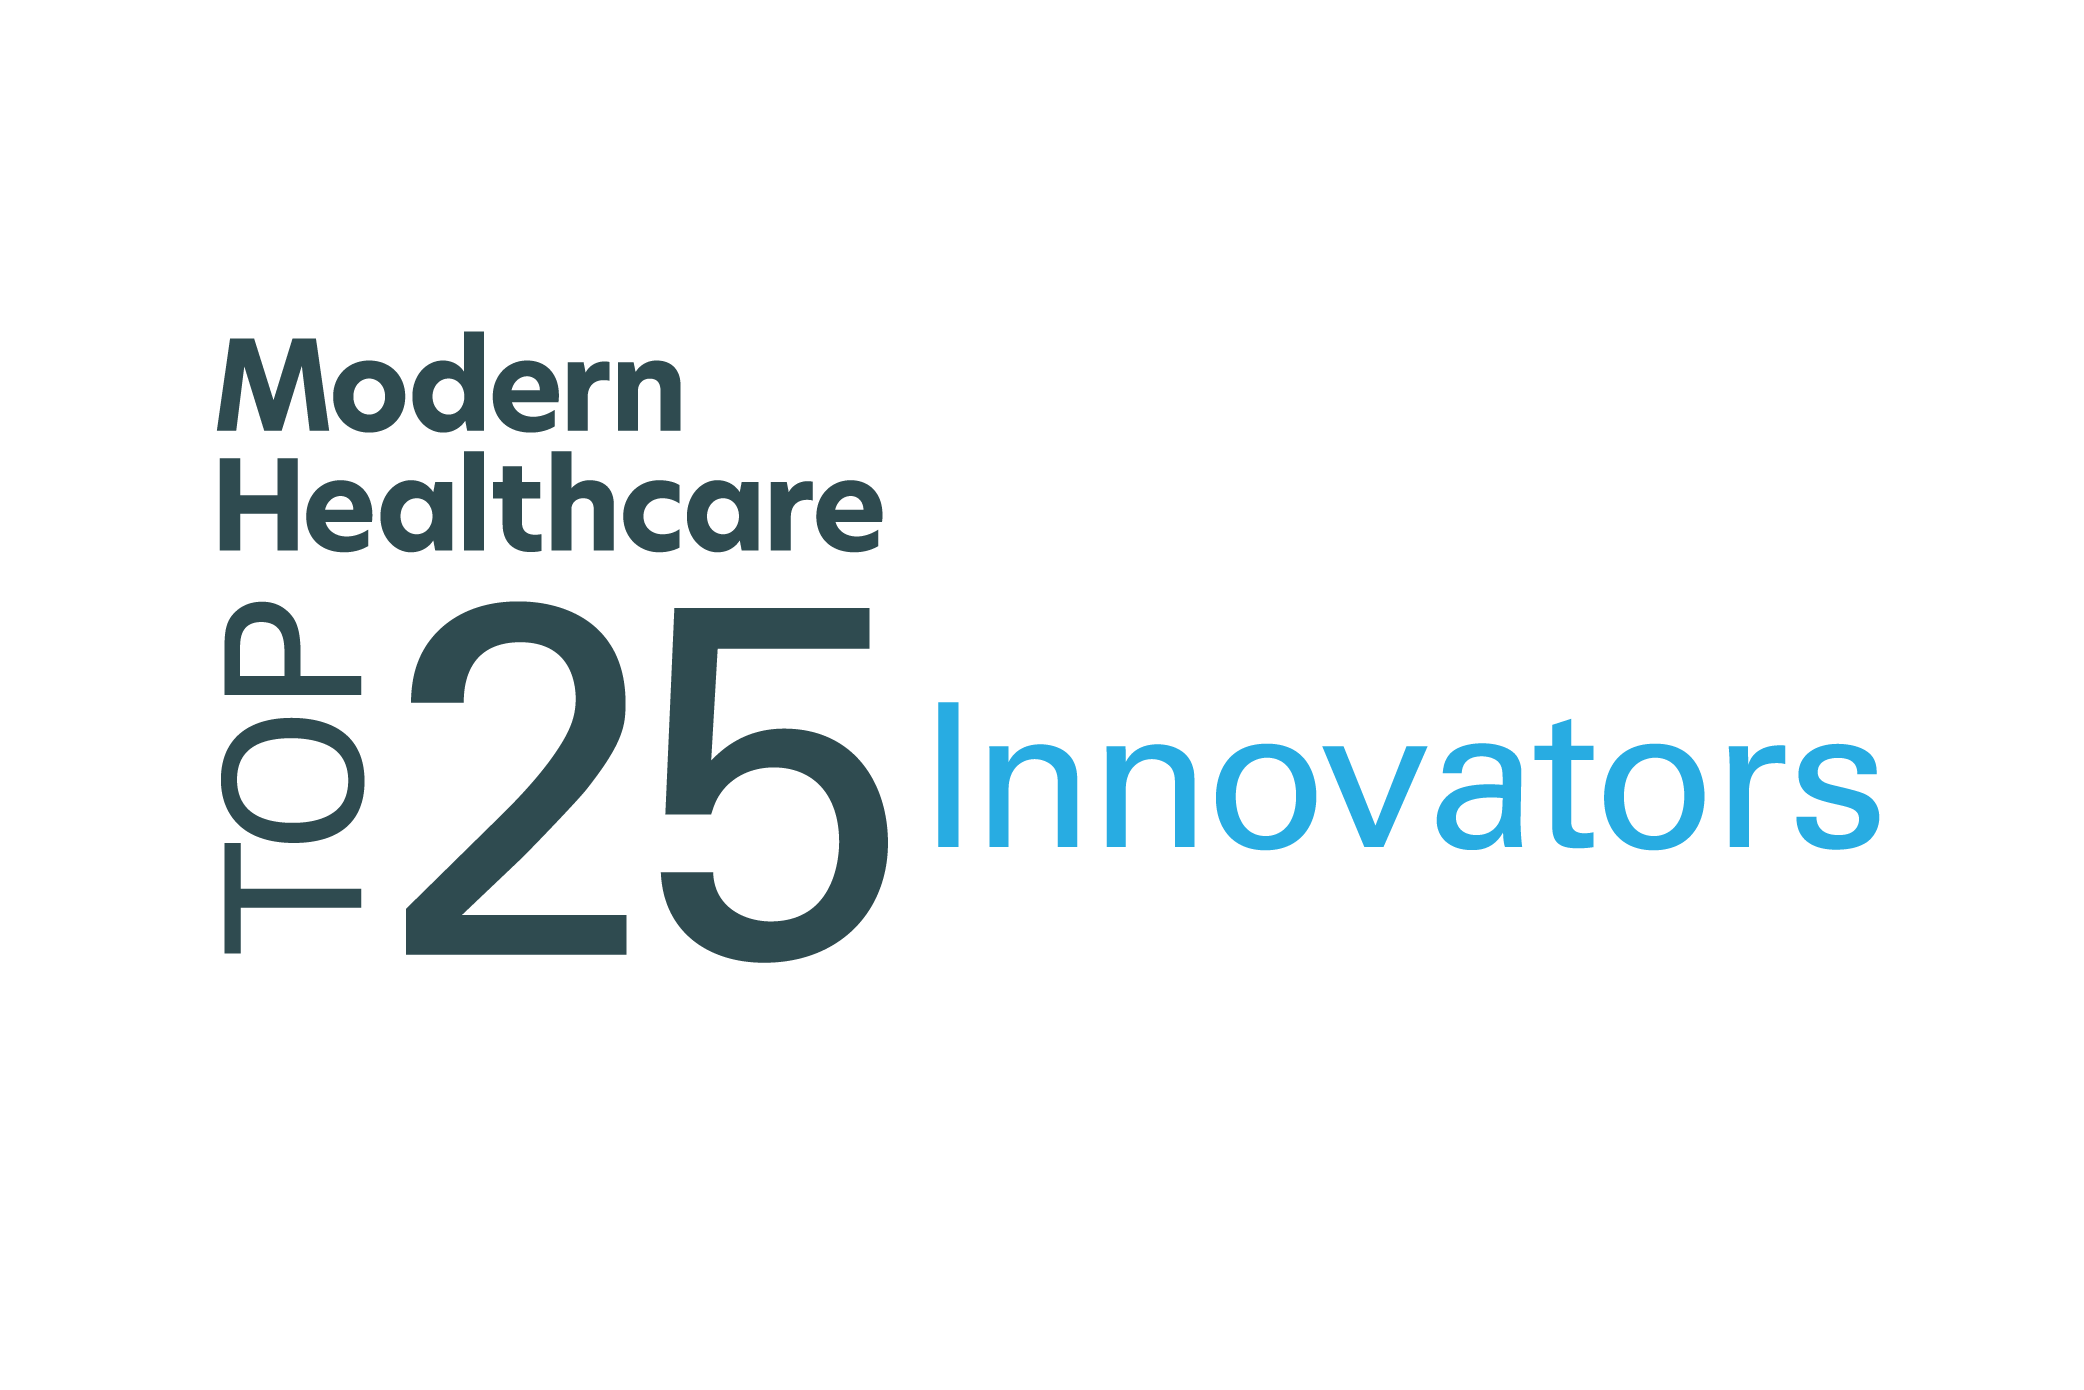 The 'Top 25 Innovators' in health care, according to Modern Healthcare